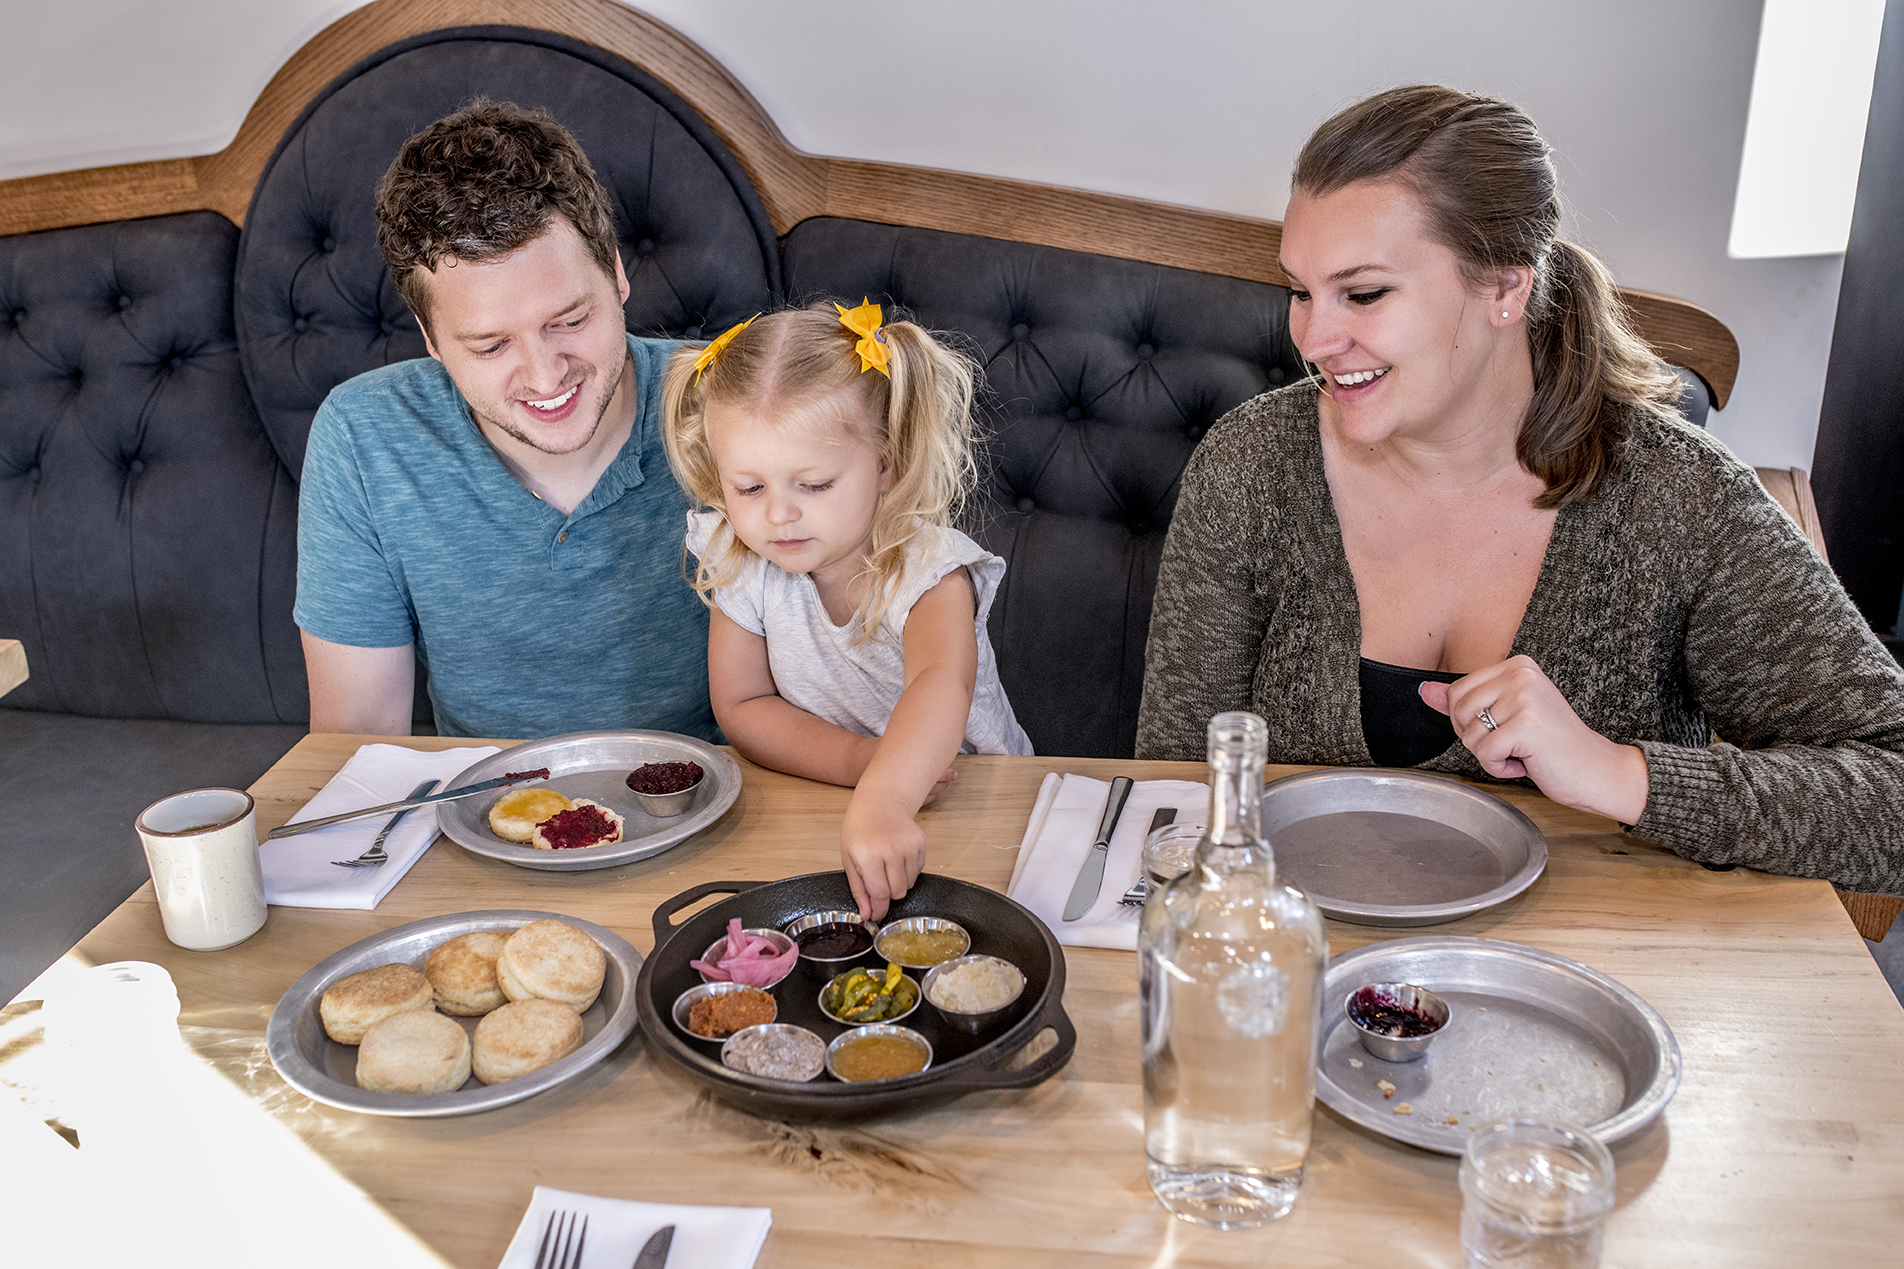  Family shares the Chef’s Choice of Jams, Jellies and Pickles with Signature Biscuits also known as Trail Pickins. || Image:  Twin Spire Photography  - Published: 10.9.2019 